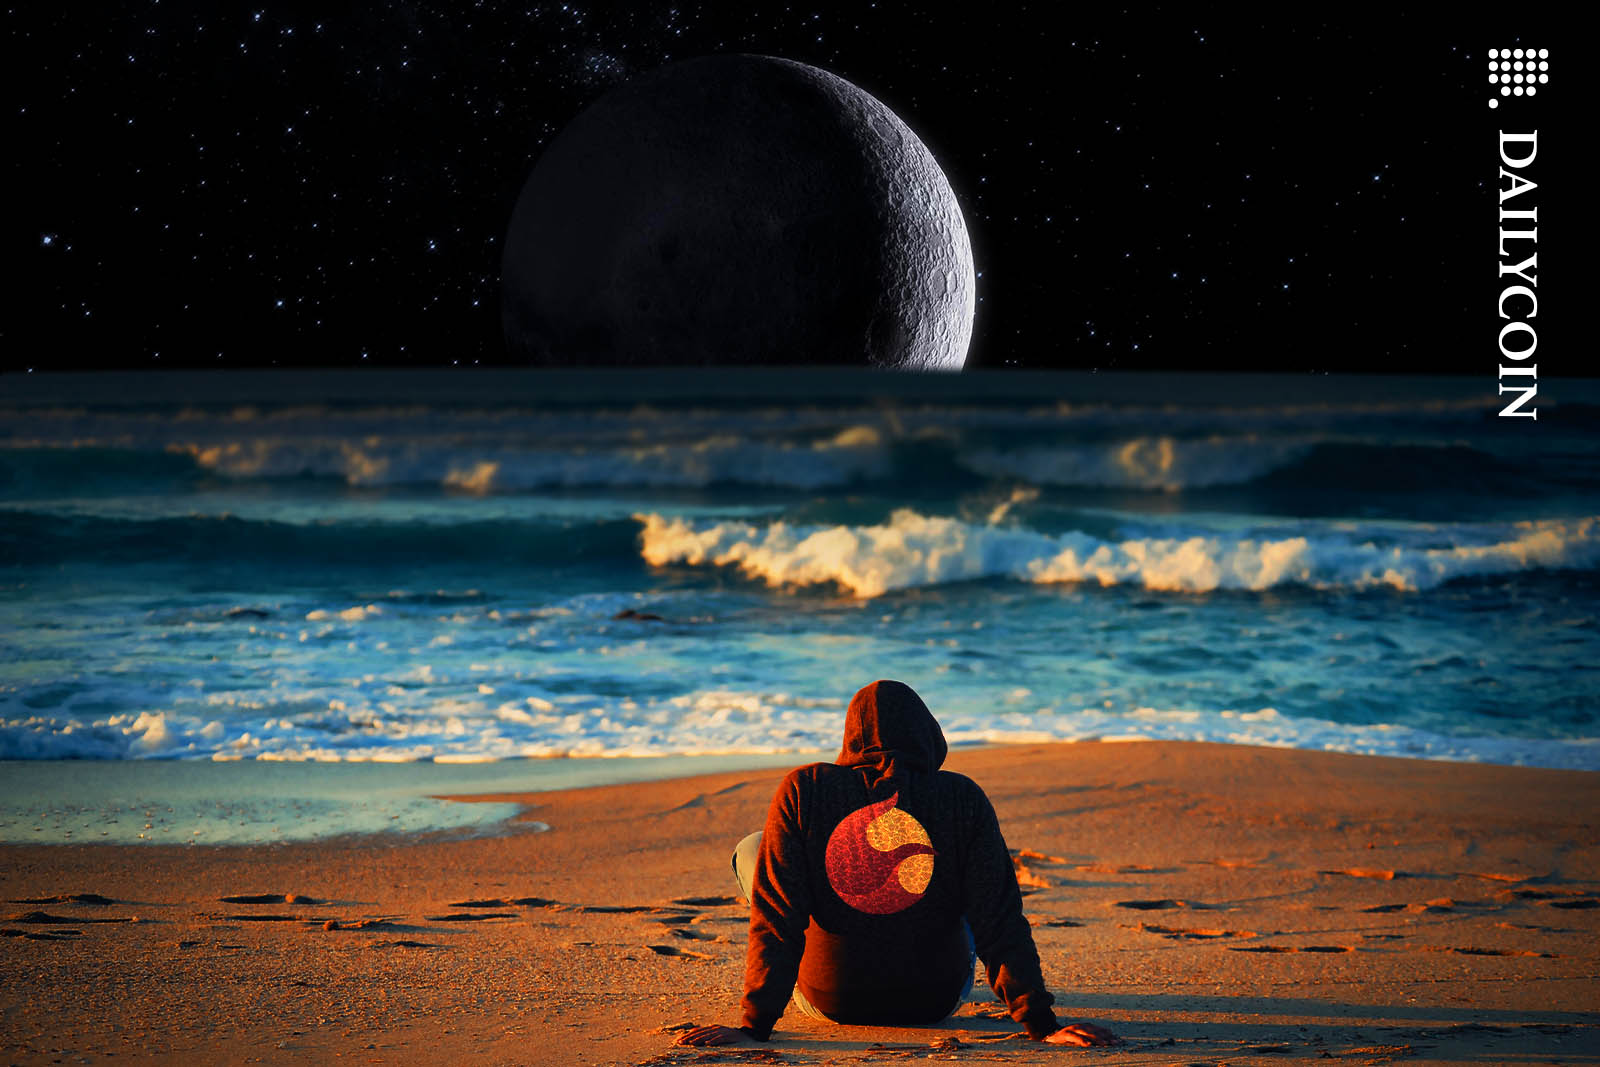 Man in a Tera Luna hoodie staring at the moon on a beach.